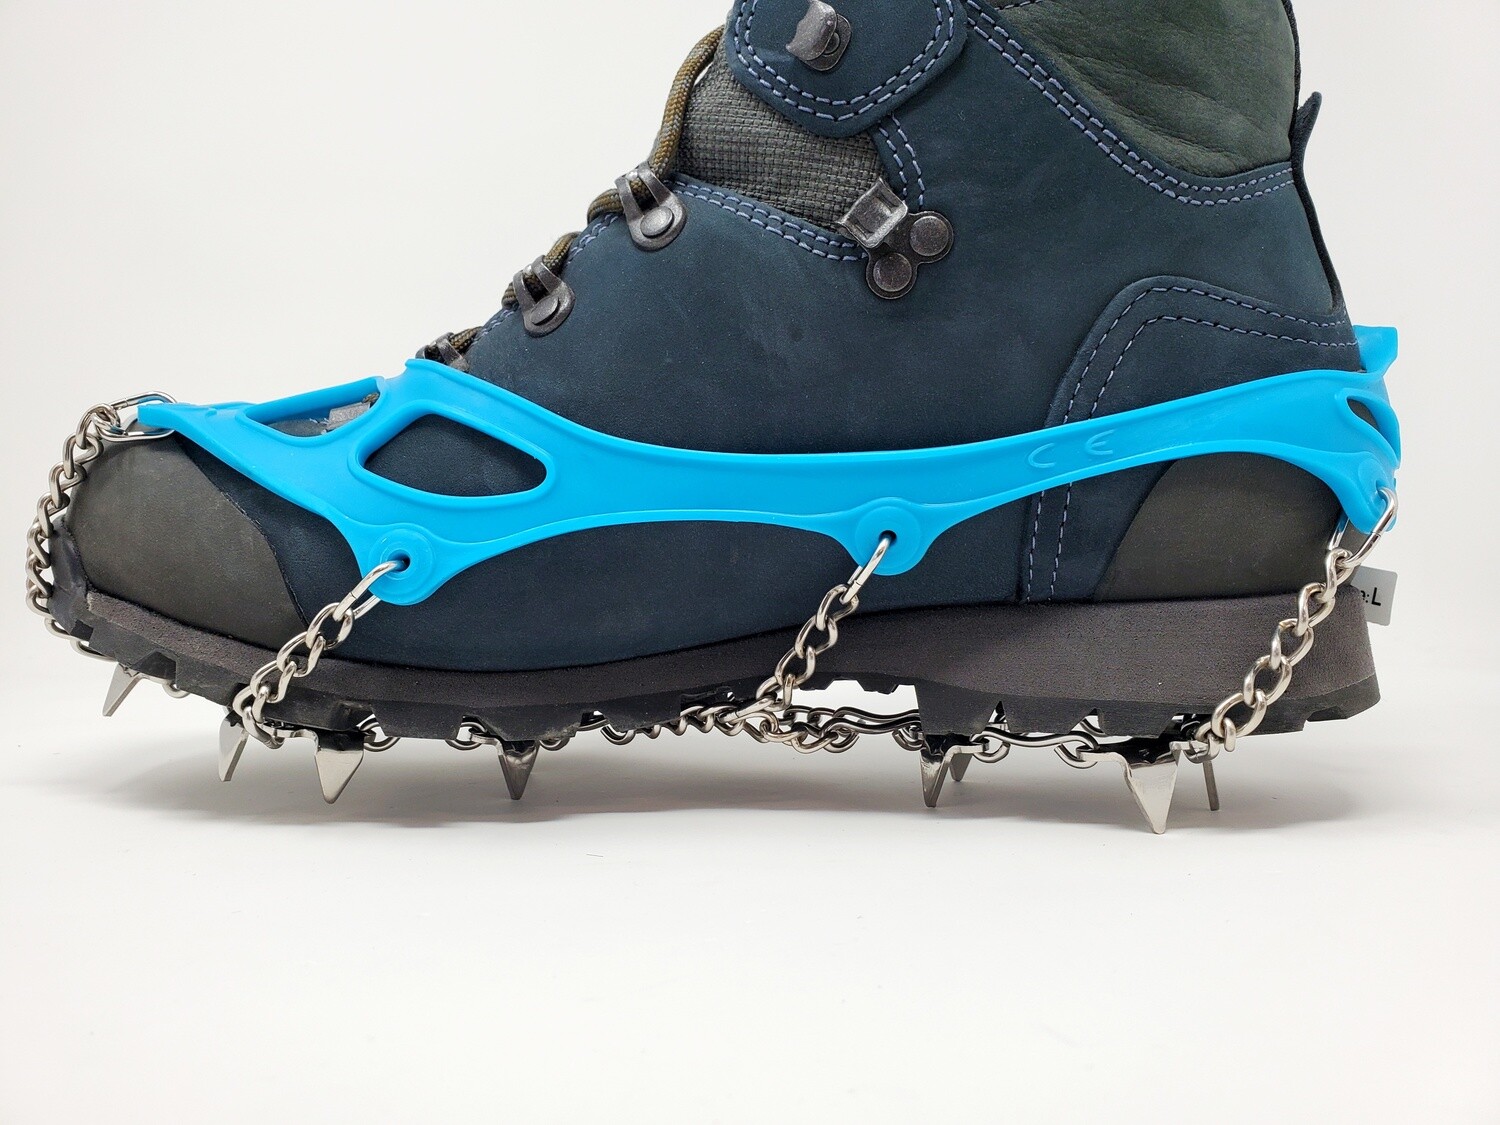 Winter Hiking Anti Slip Micro spikes Traction Device - Free Shipping!